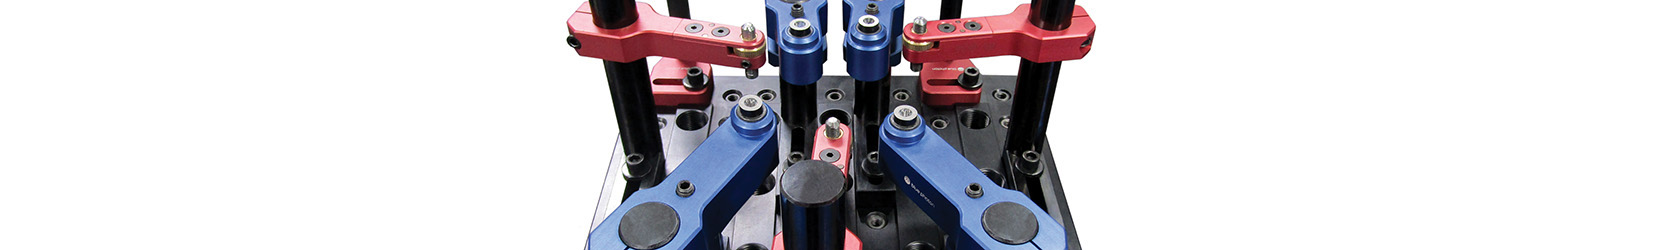 Photo of a Blue Photon universal fixture kit for easy, secure workholding